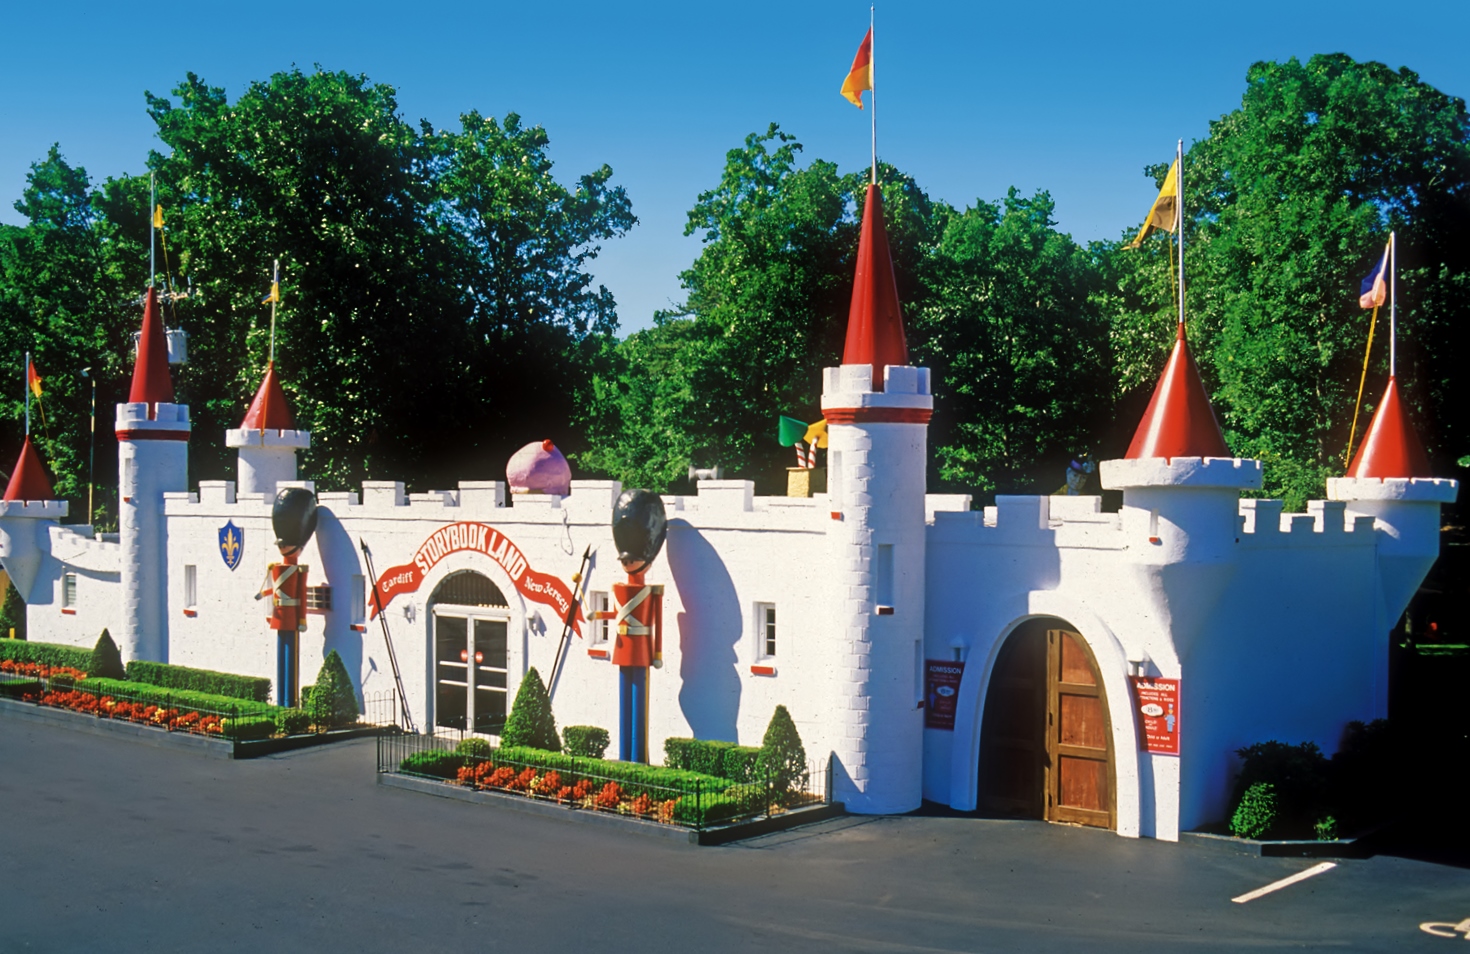 Things to Do In New Jersey - Storybook Land - Things to Do In New Jersey